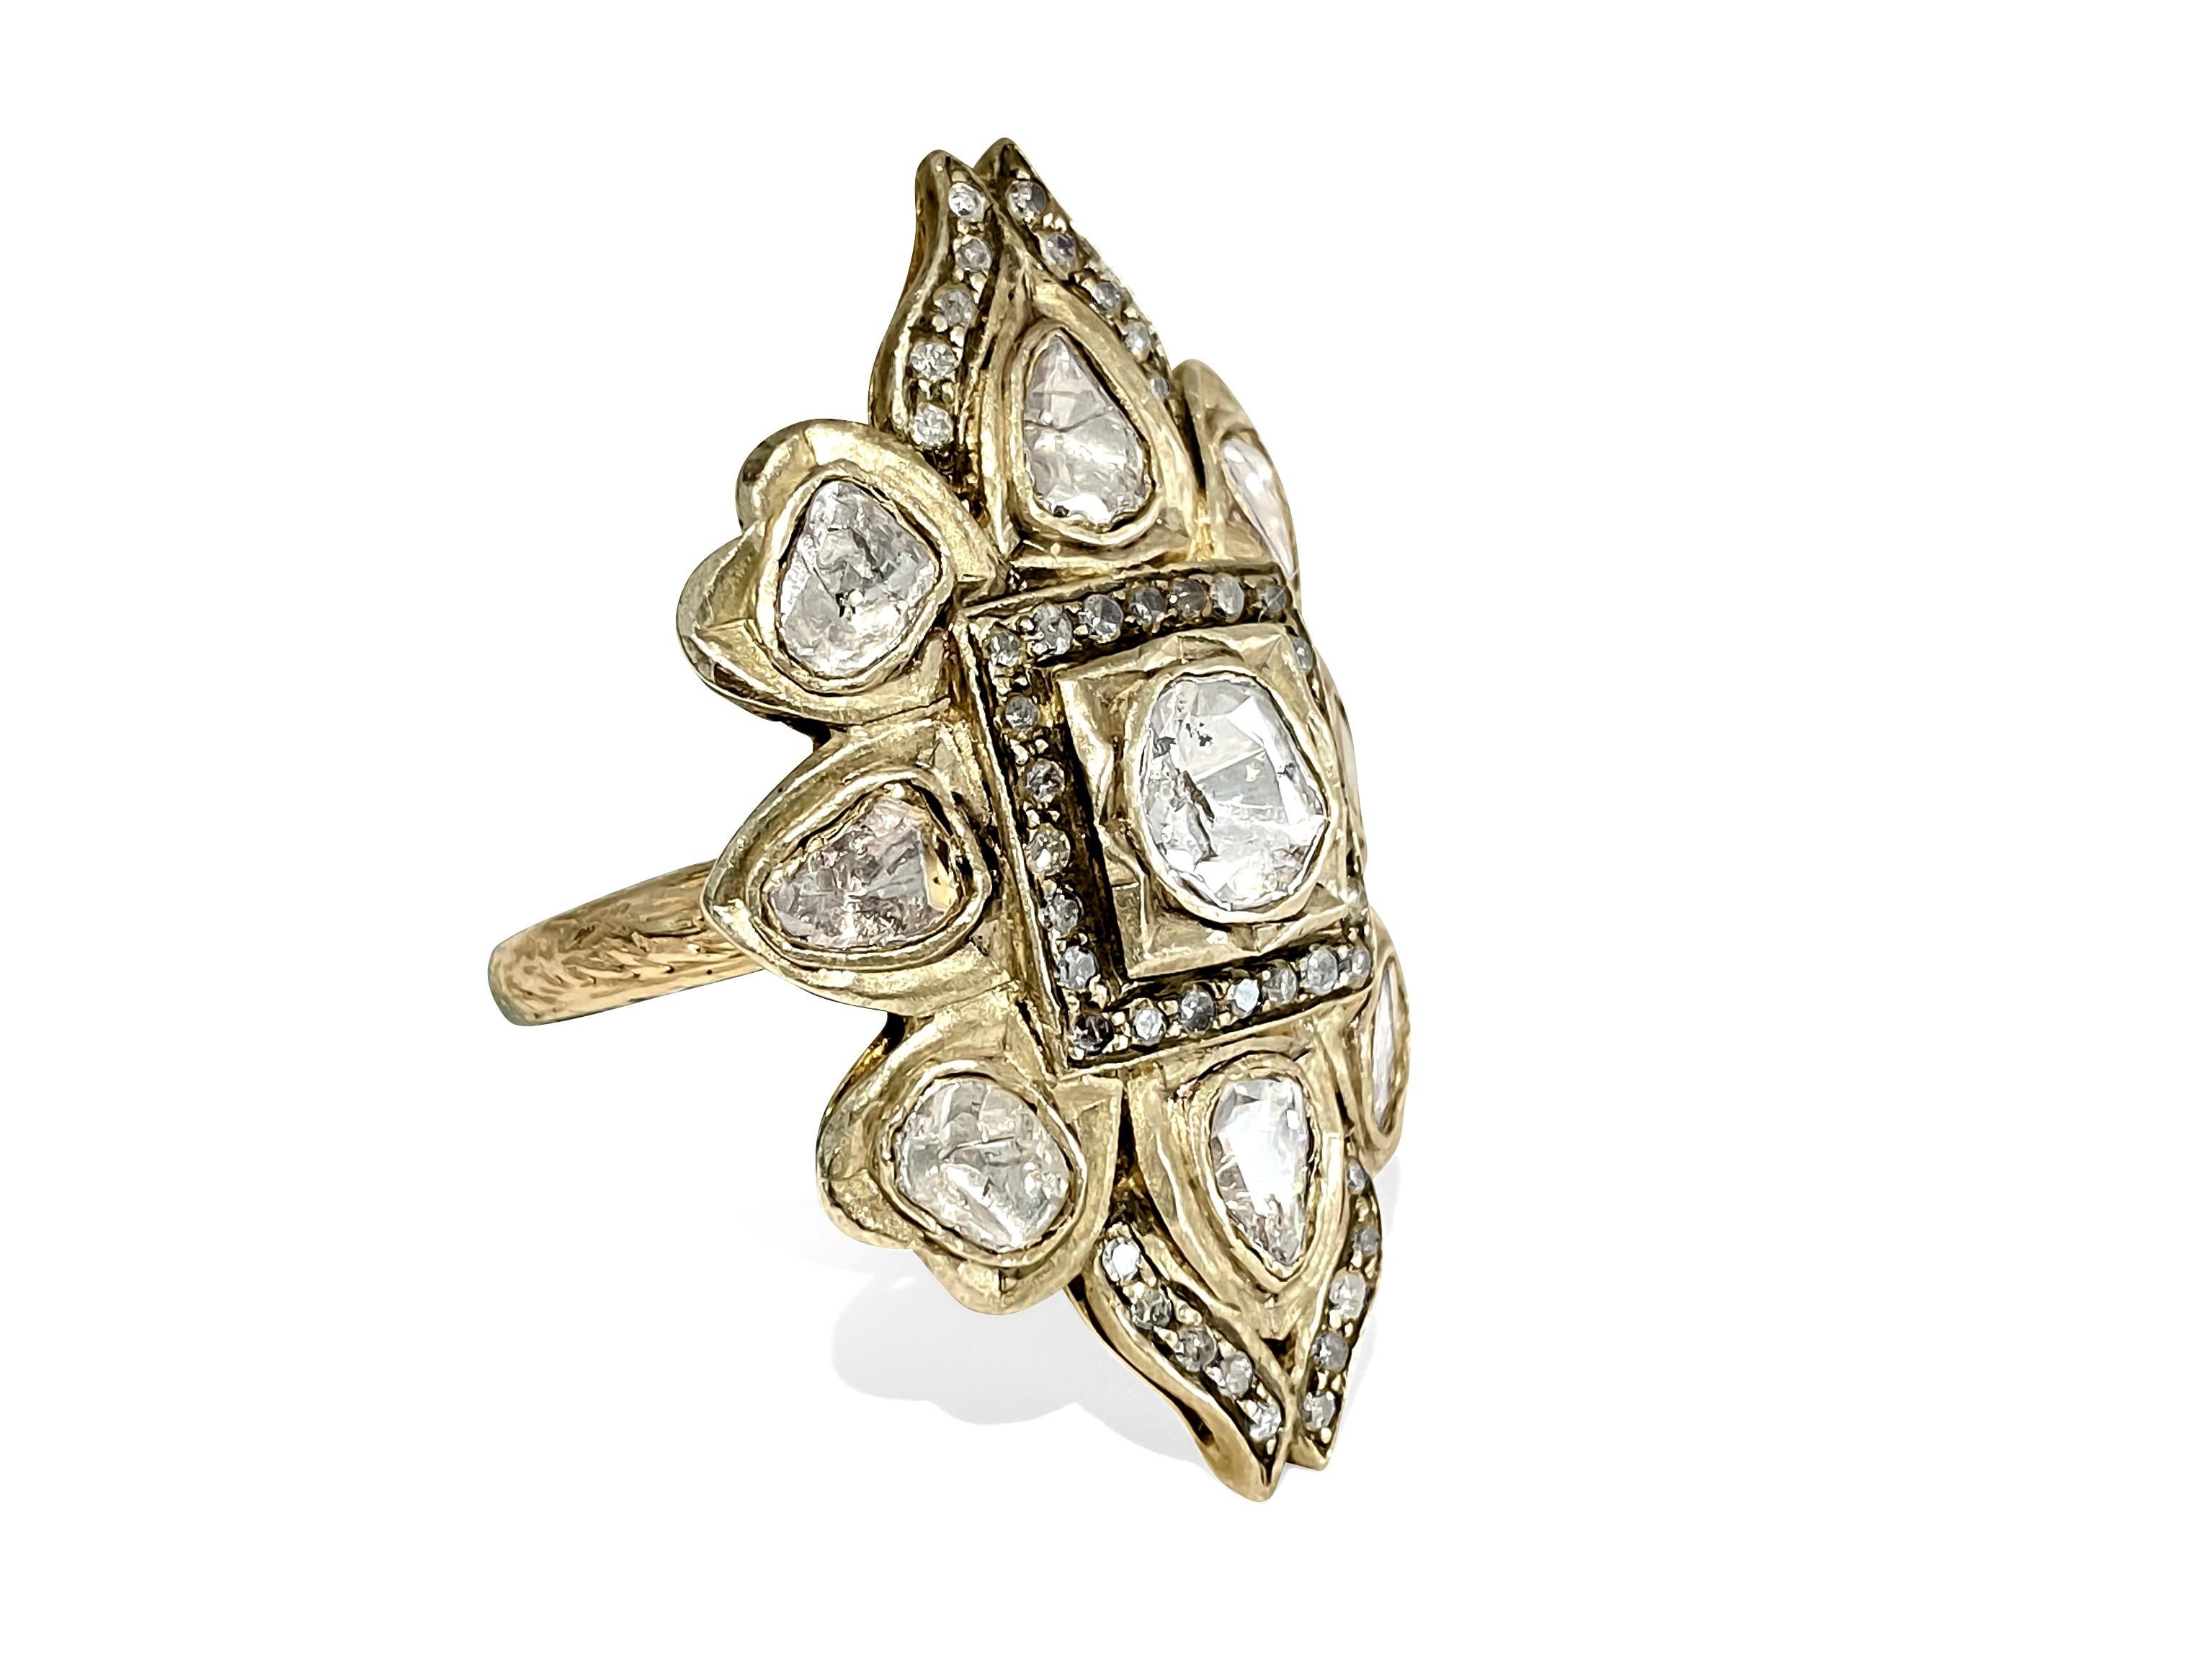 Natural Rose Cut Diamond Pave Ring. 14K Yellow Gold In Excellent Condition For Sale In Miami, FL